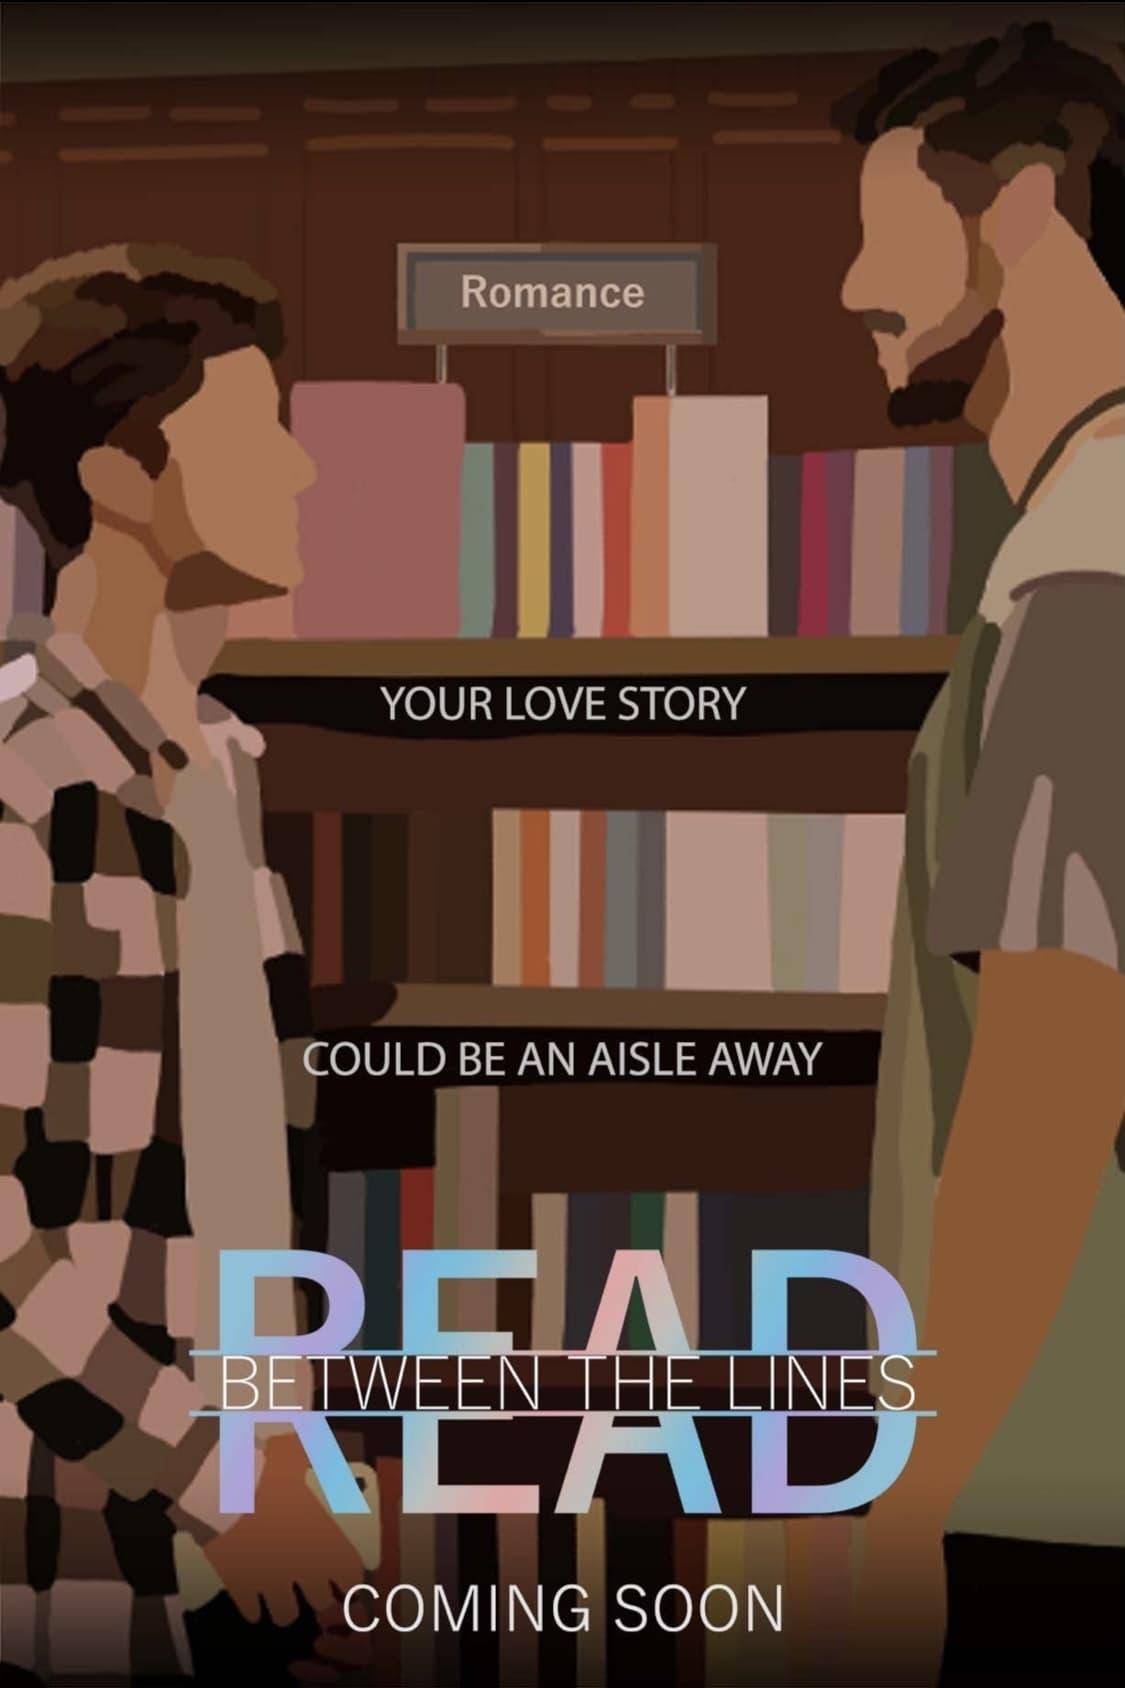 Read Between the Lines poster